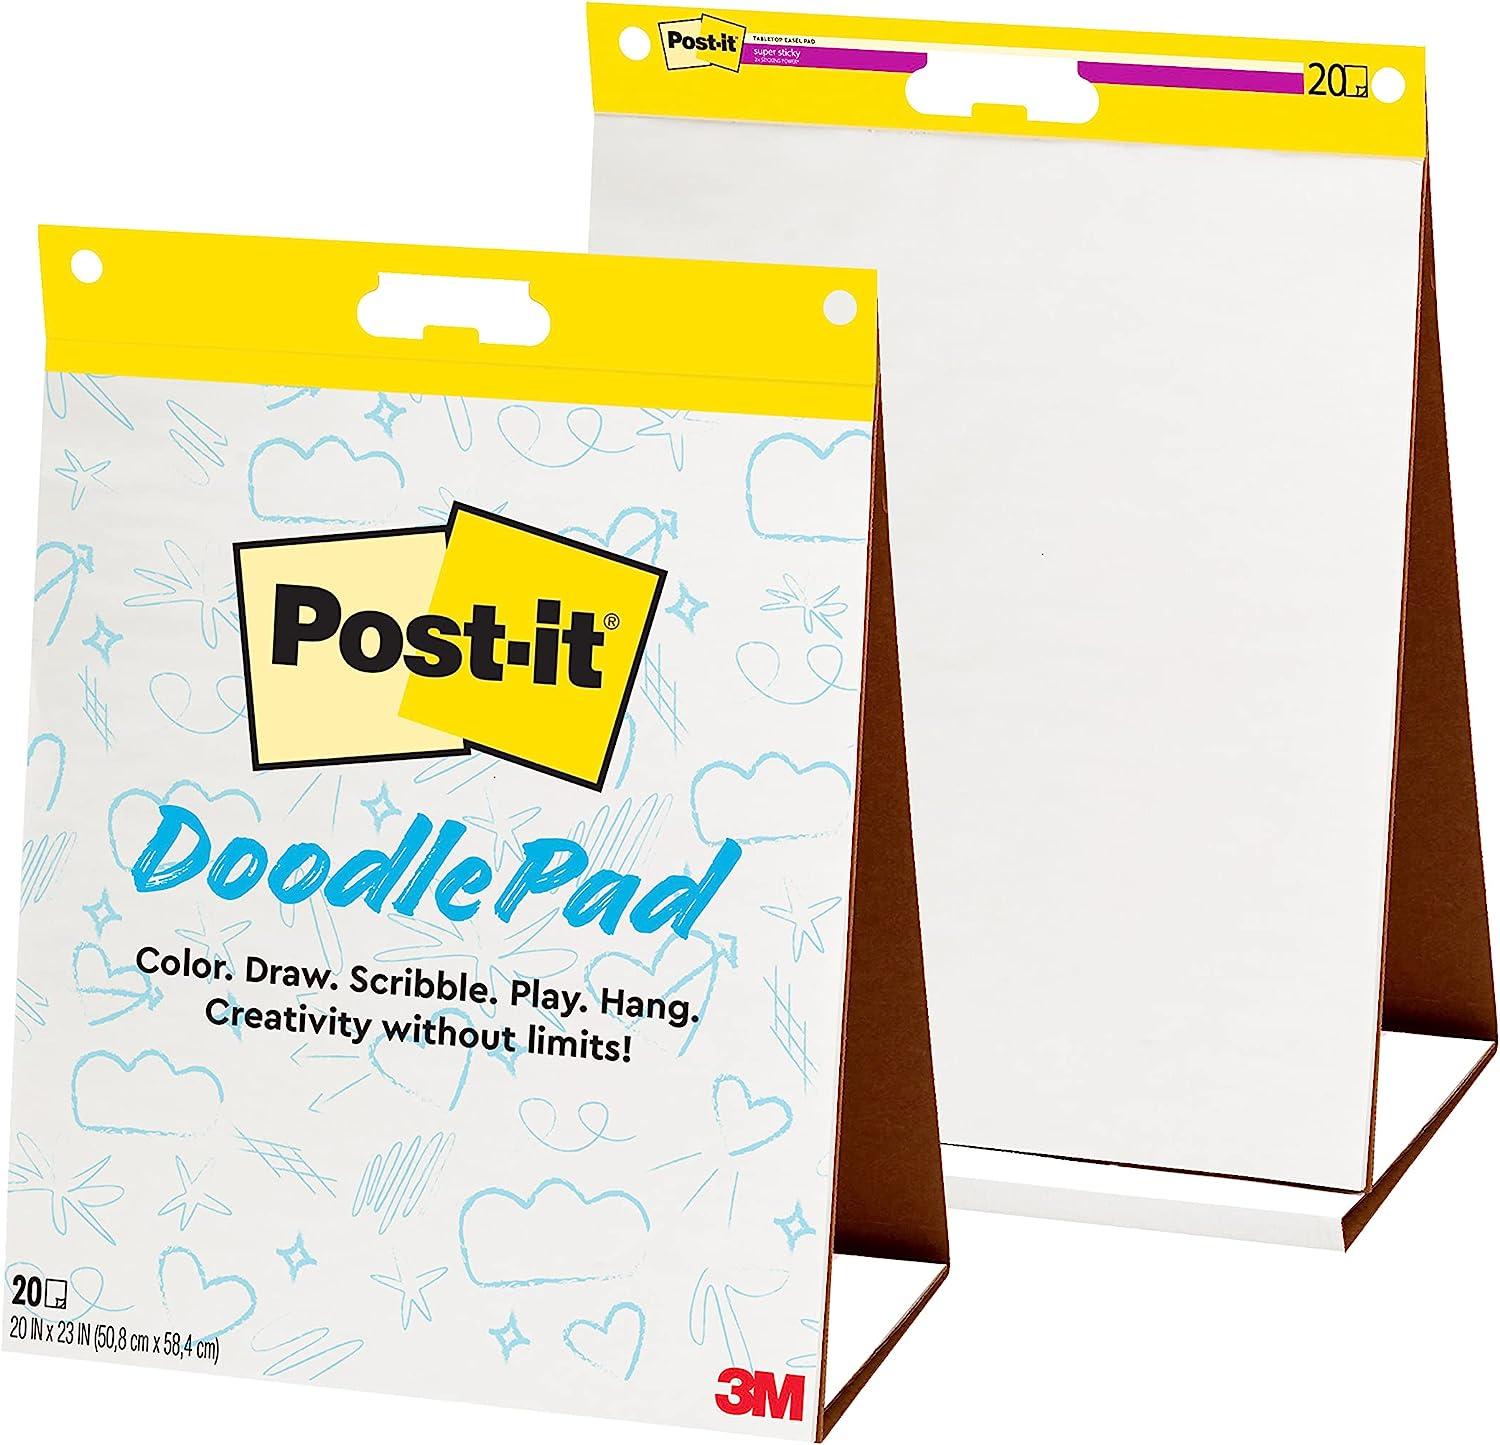 post-it doodle pad portable art easel self-stick tabletop easel pad 20 in x 23 in 20 sheets/pad 2 pads/pack